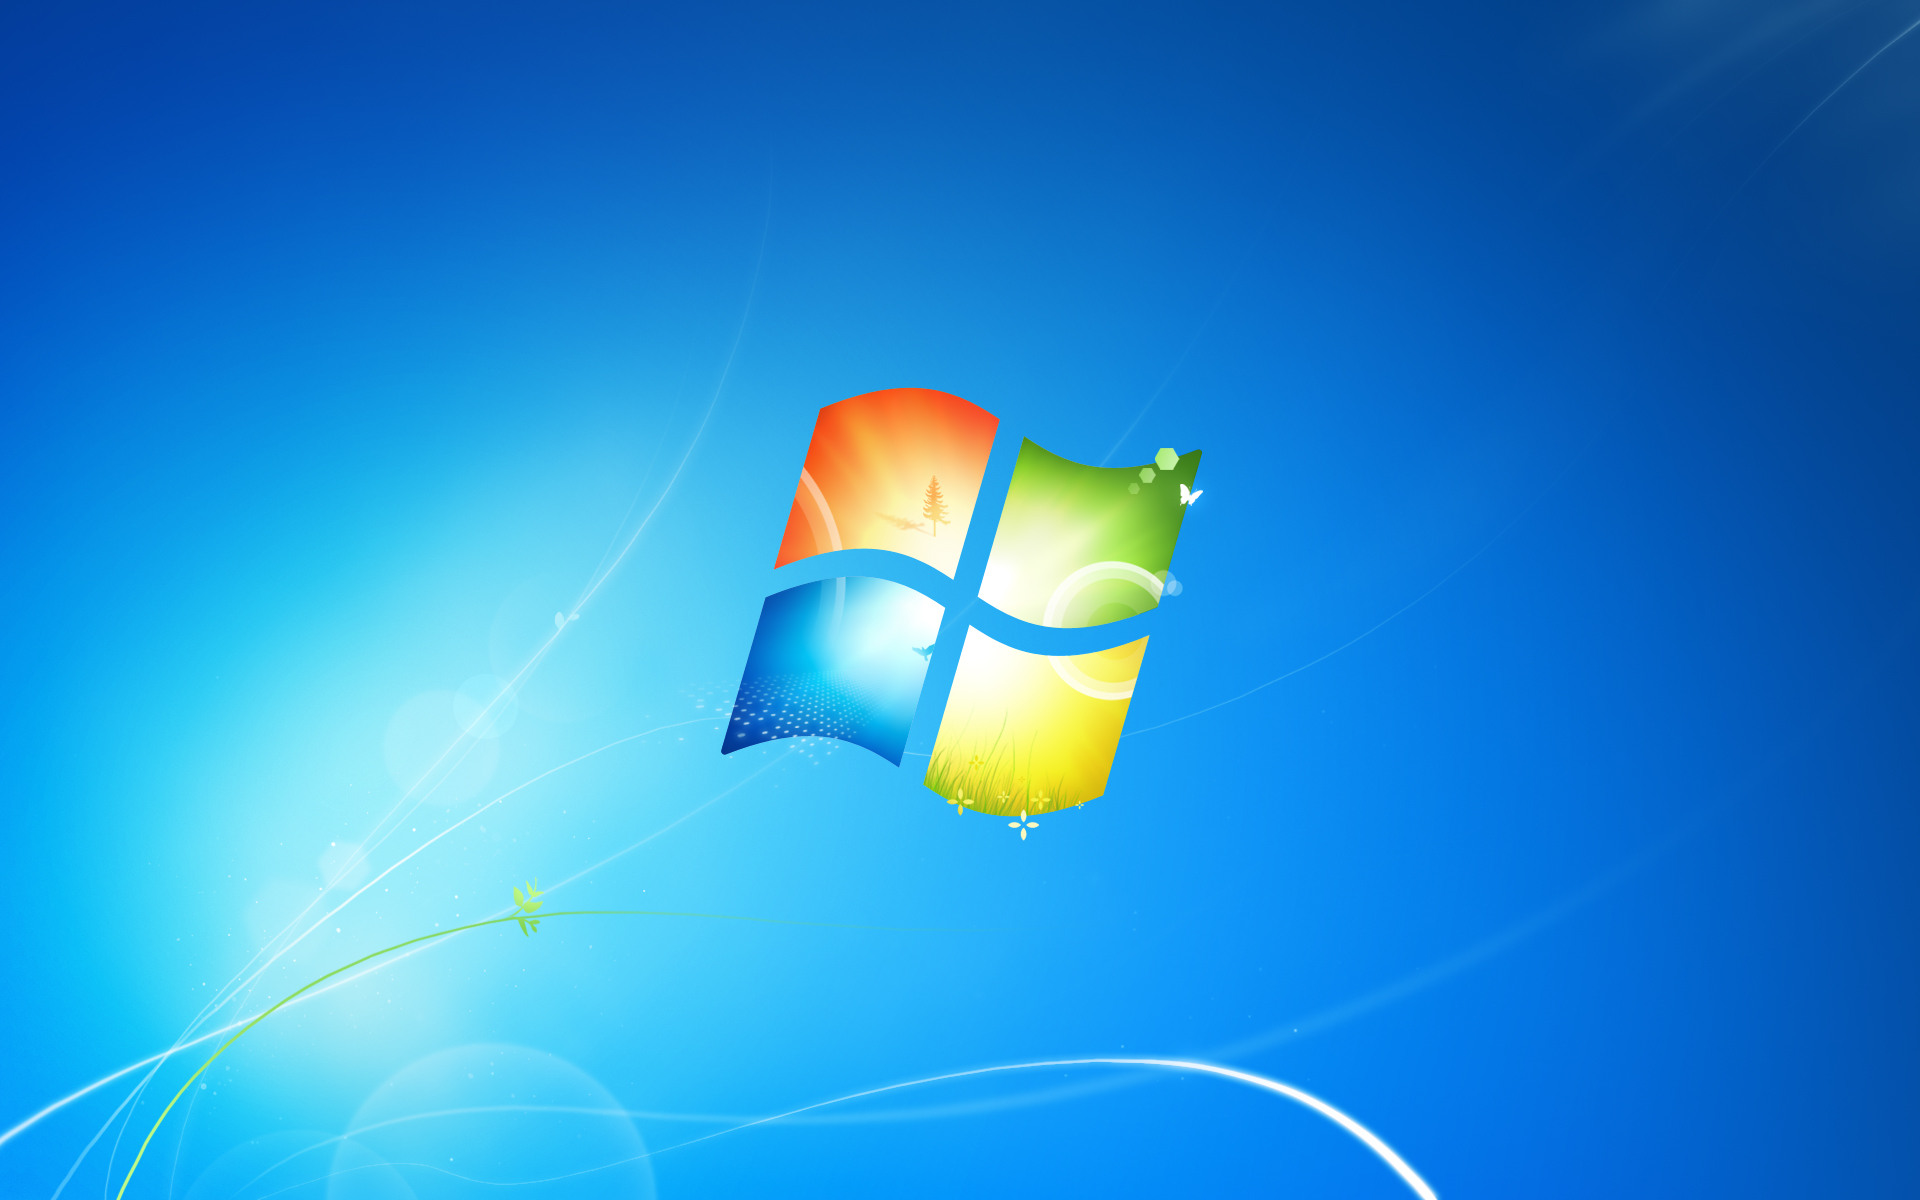 Windows Background HD Pictures